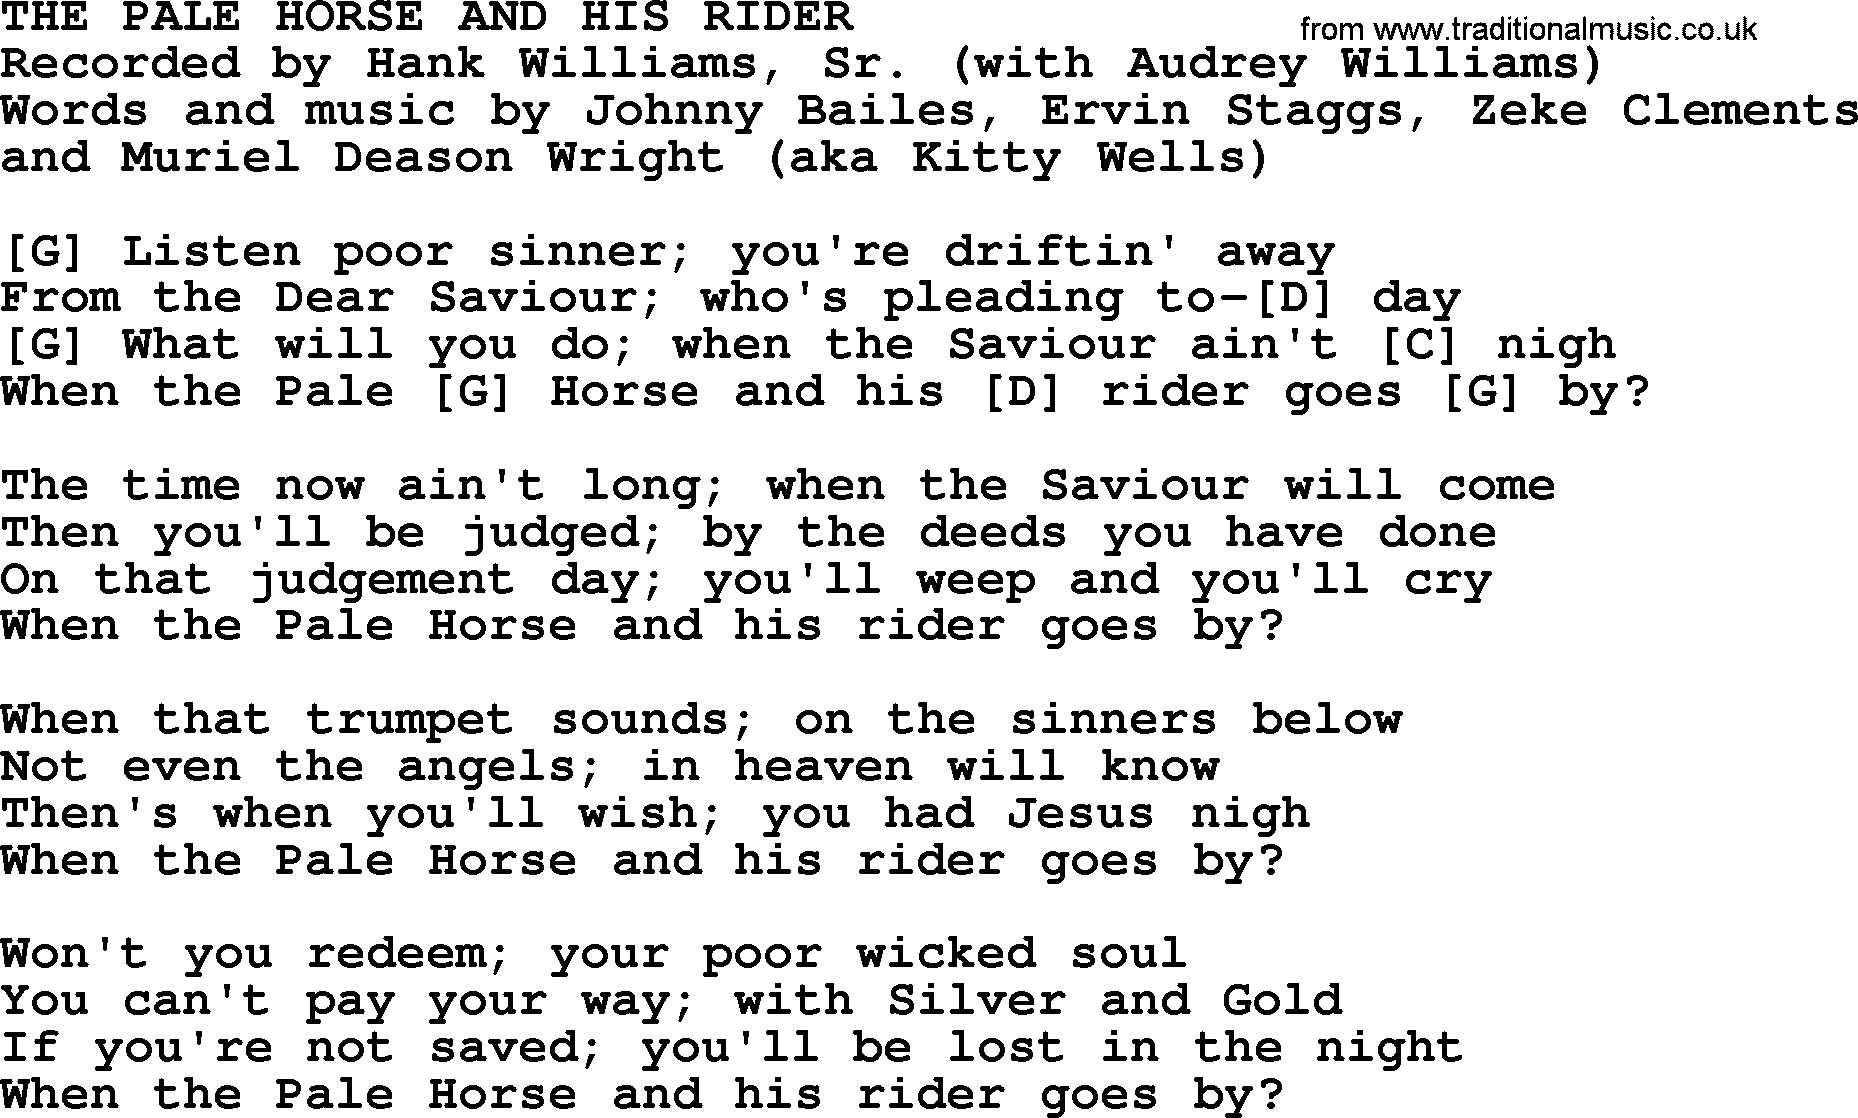 Hank Williams song The Pale Horse And His Rider, lyrics and chords